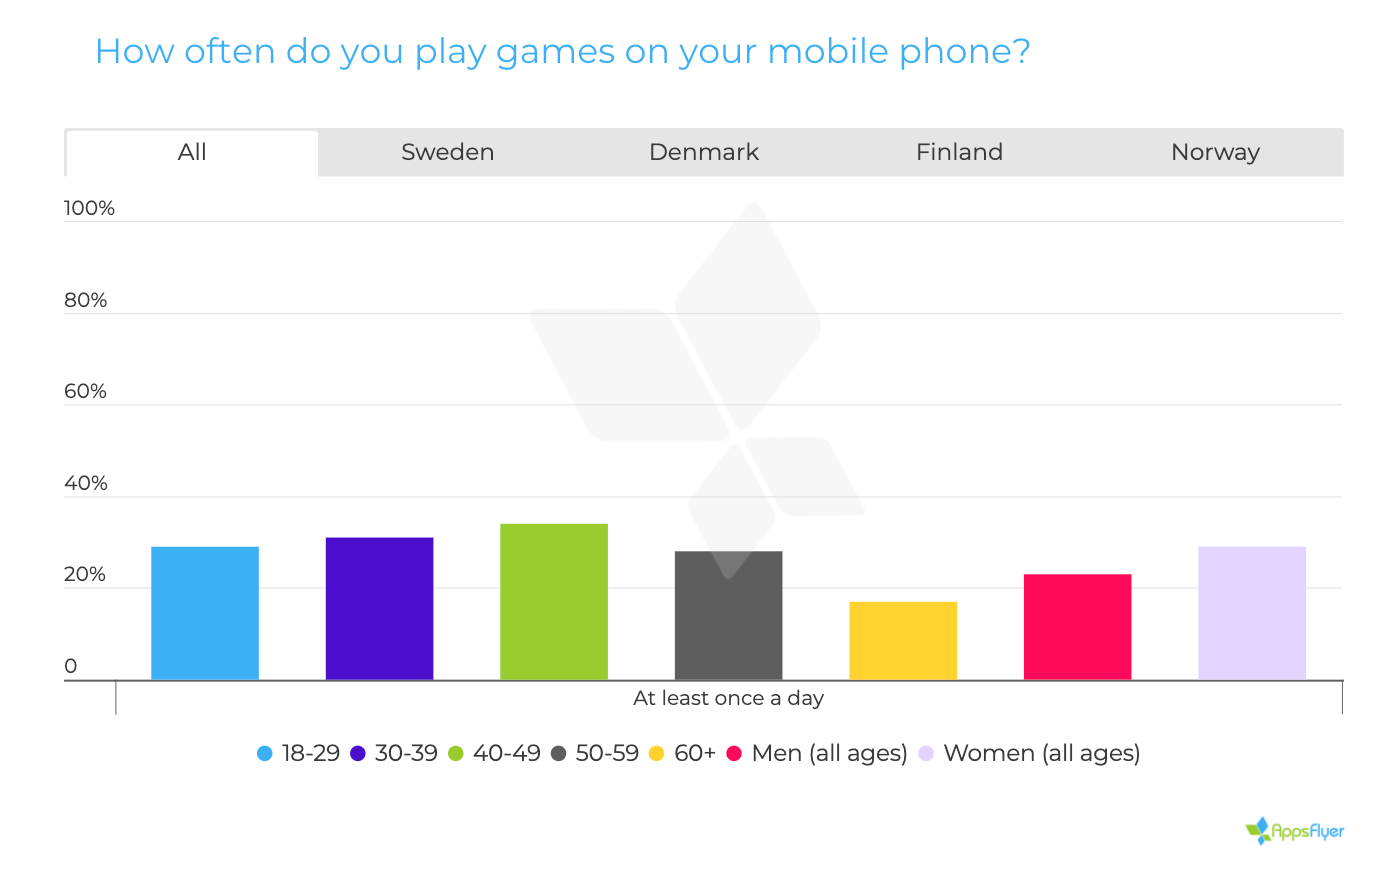 How often people play mobile games